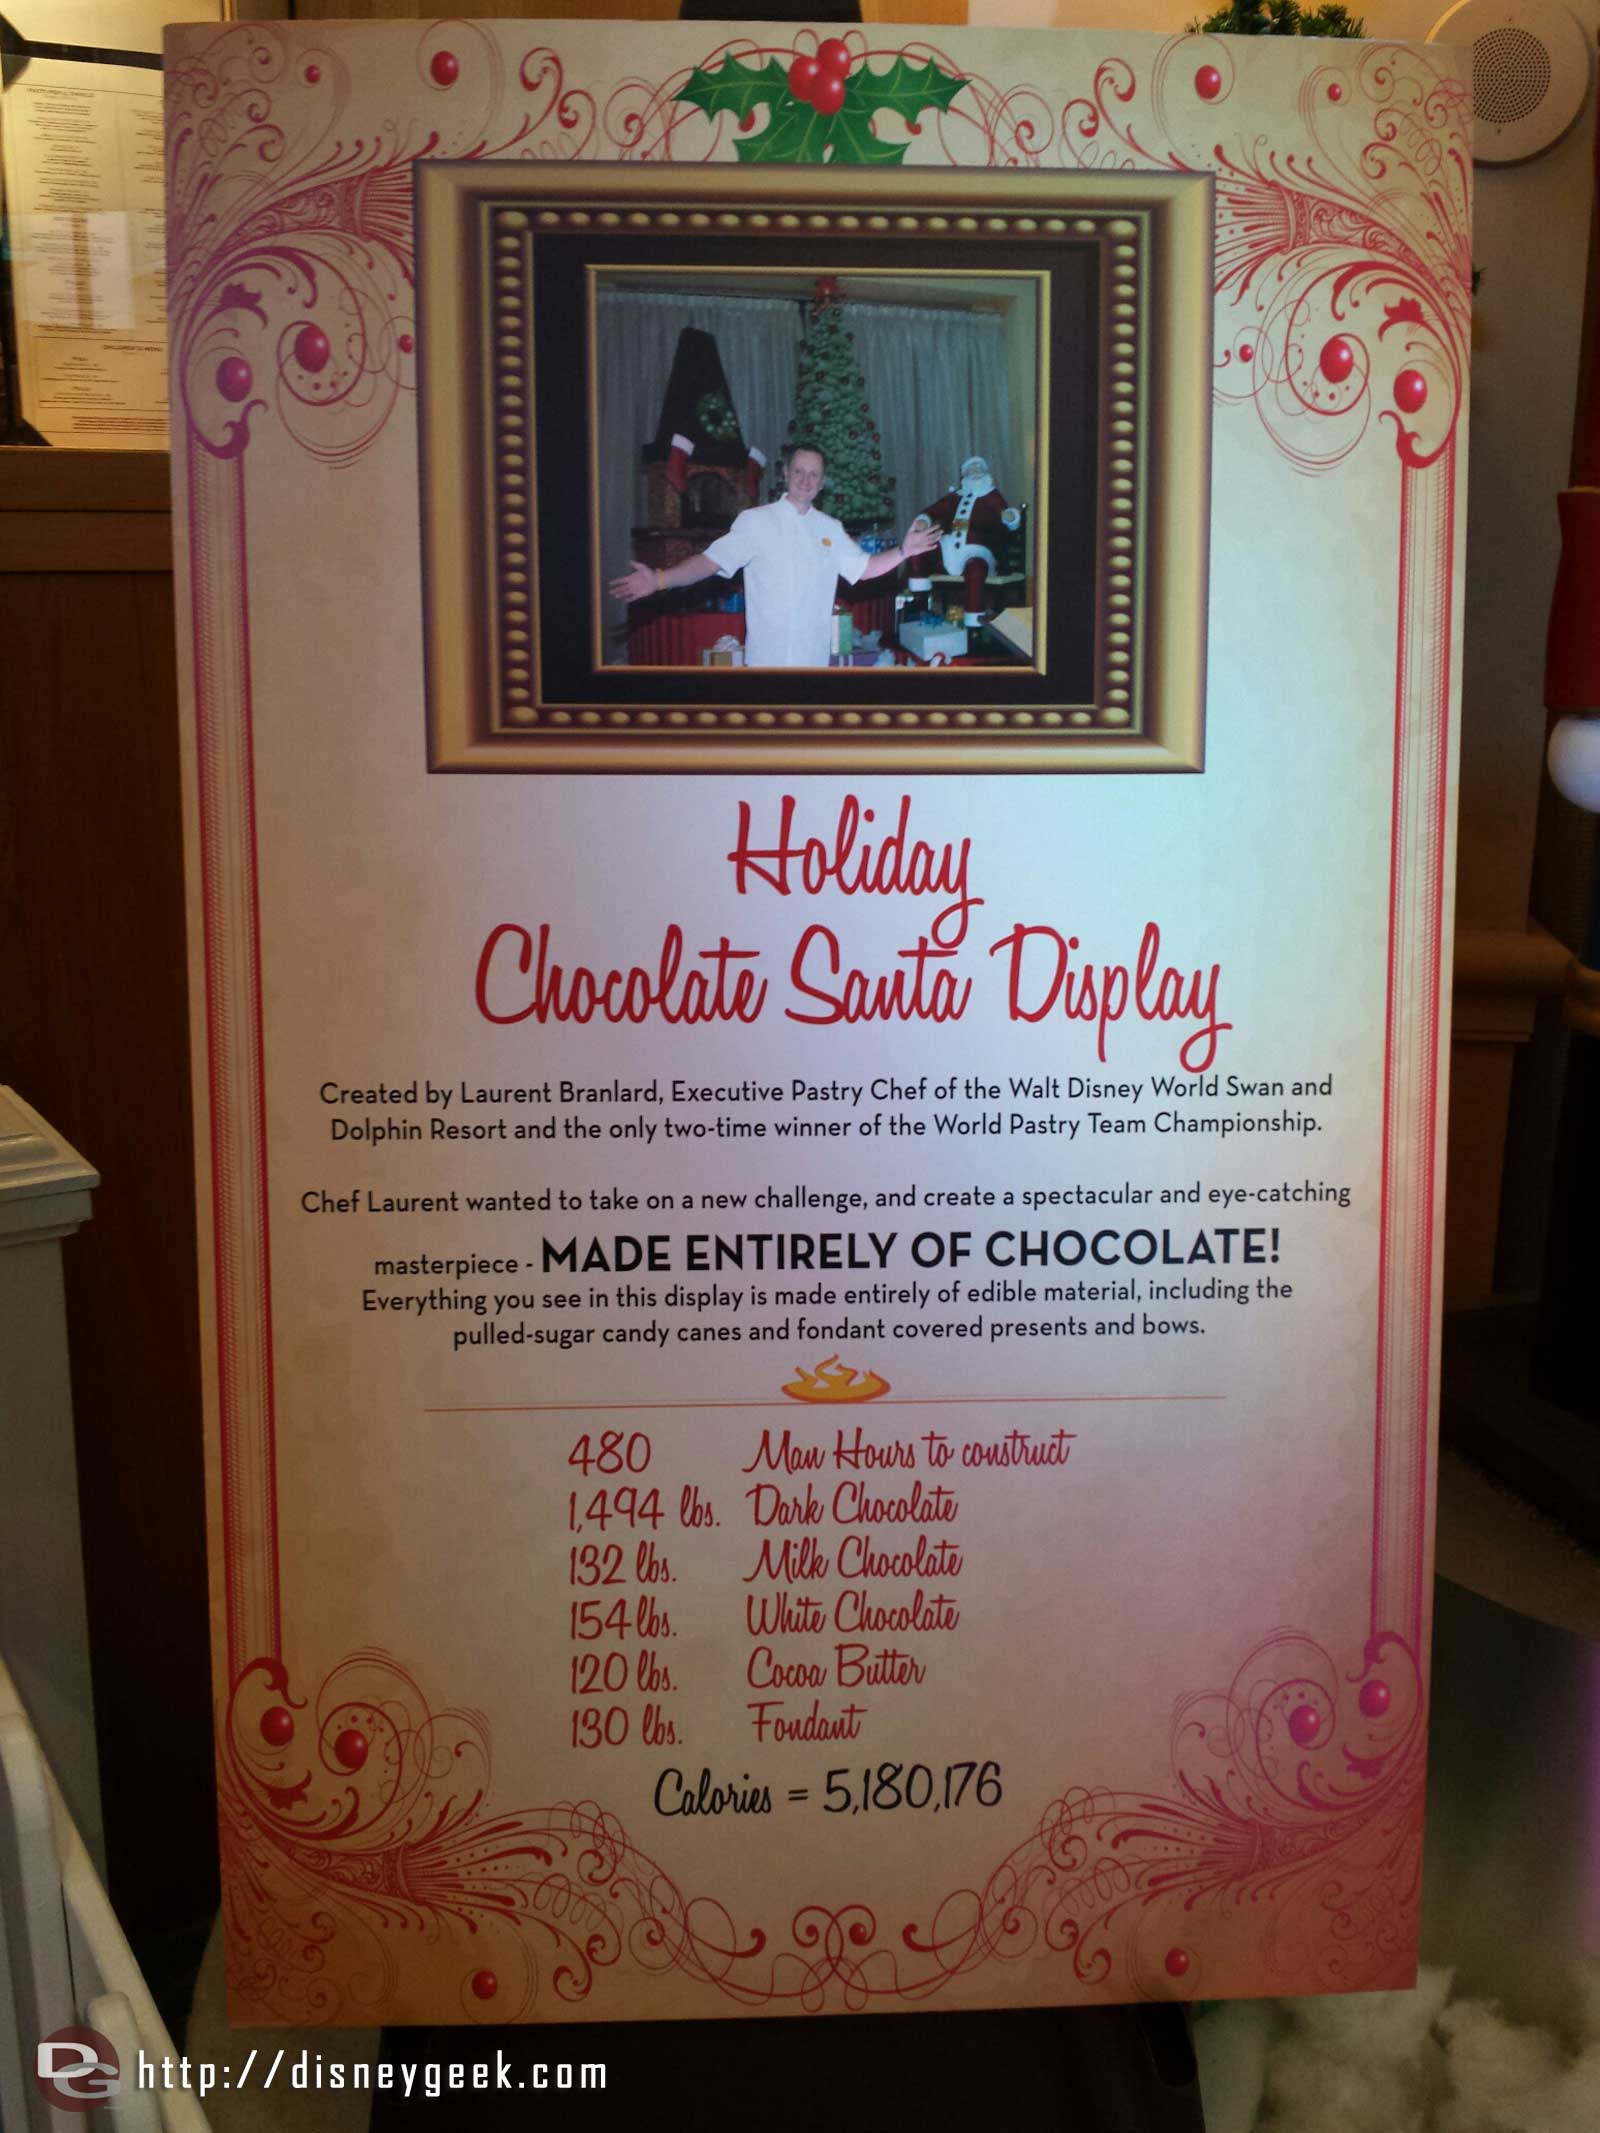 Ingredients/stats on the Holiday Chocolate Santa Display at the Swan Hotel.